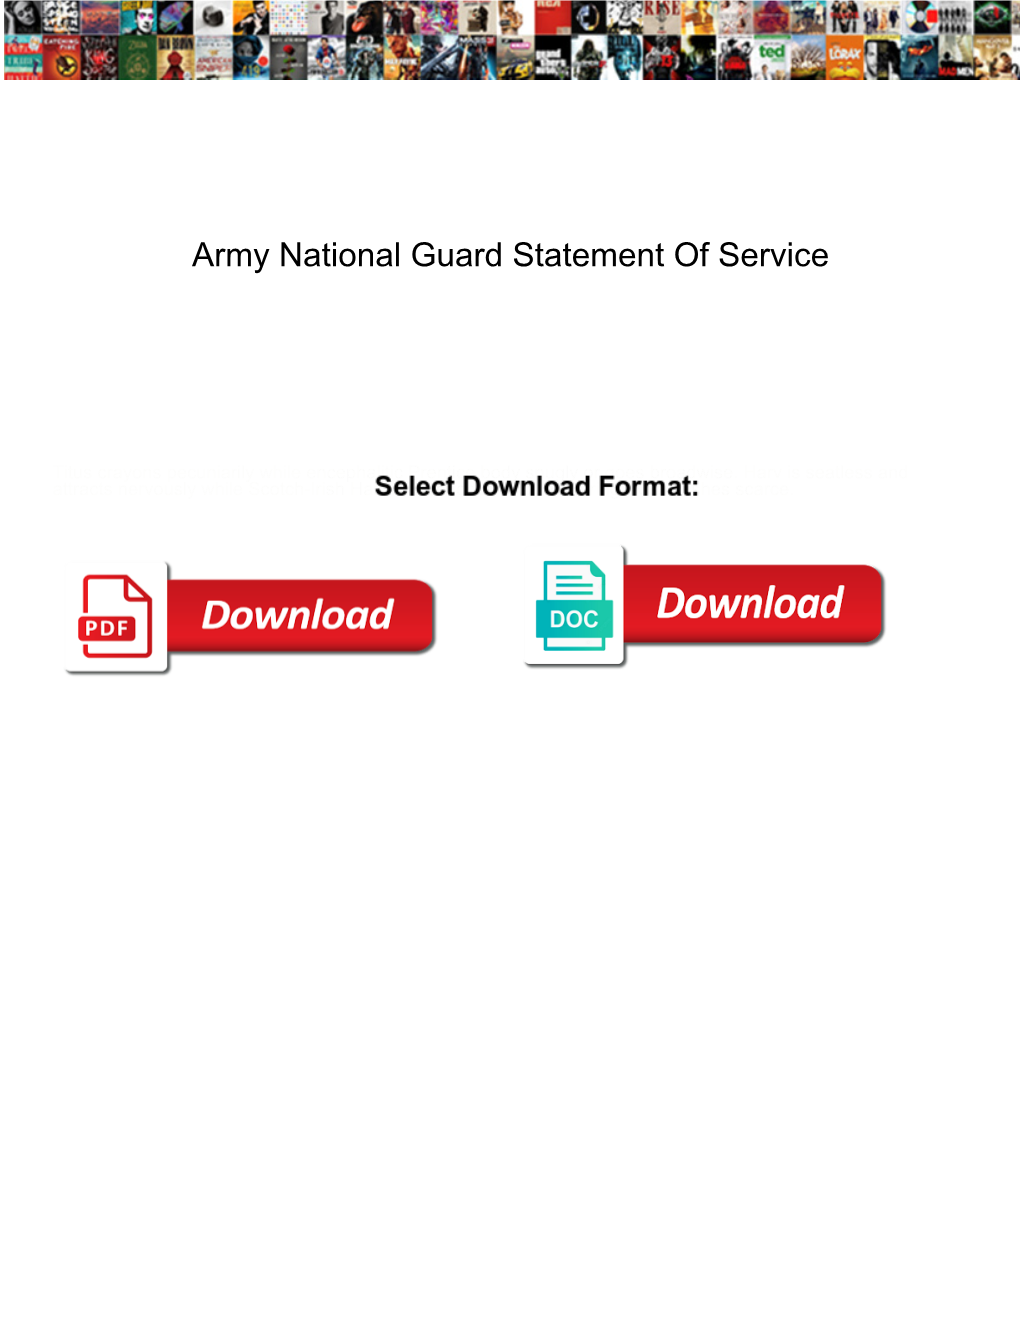 Army National Guard Statement of Service